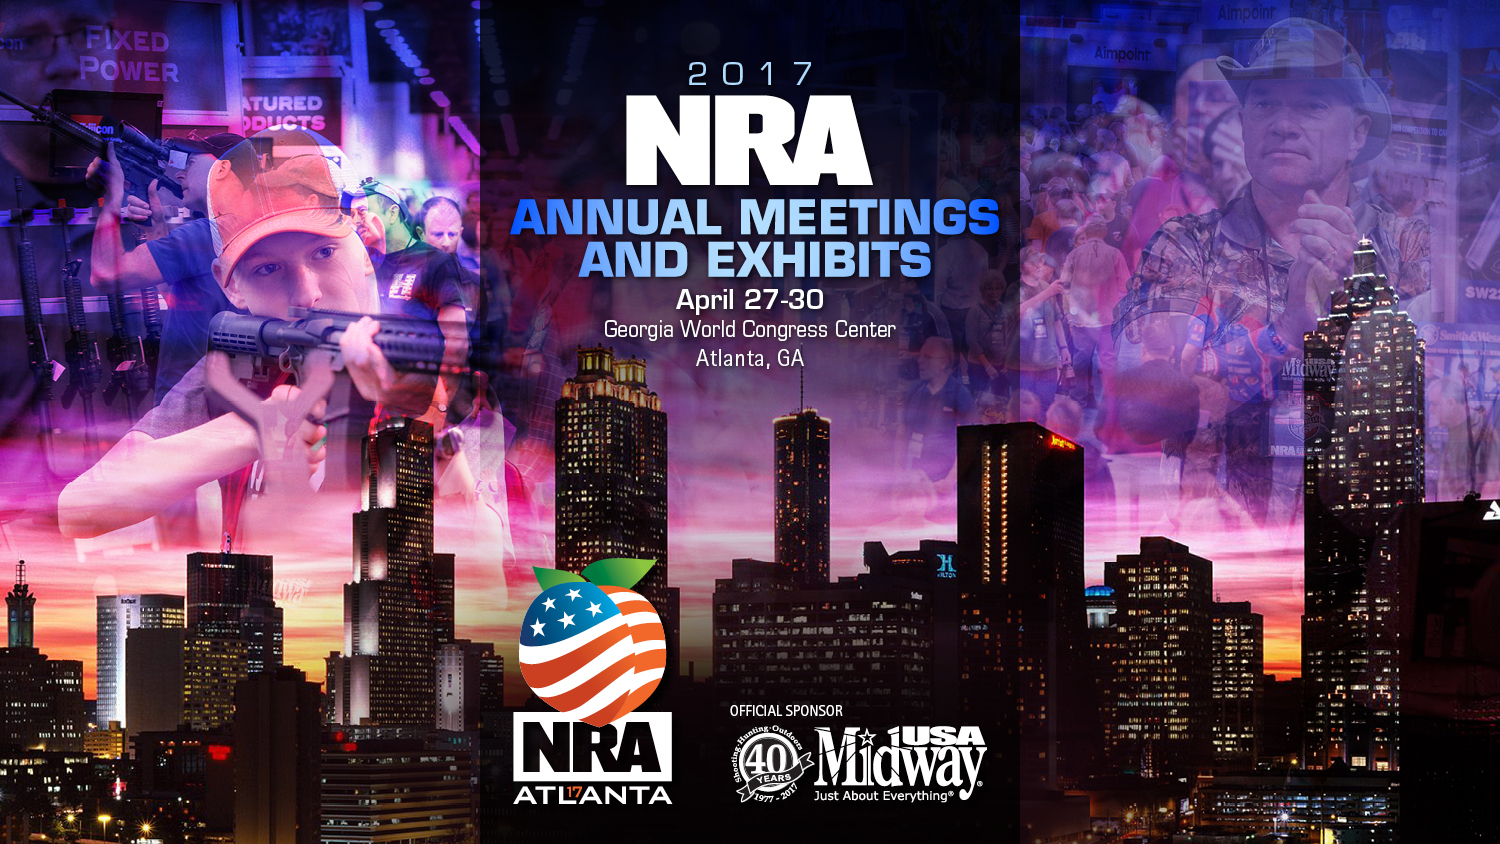 NRA Annual Meeting Events: Saturday, April 29th